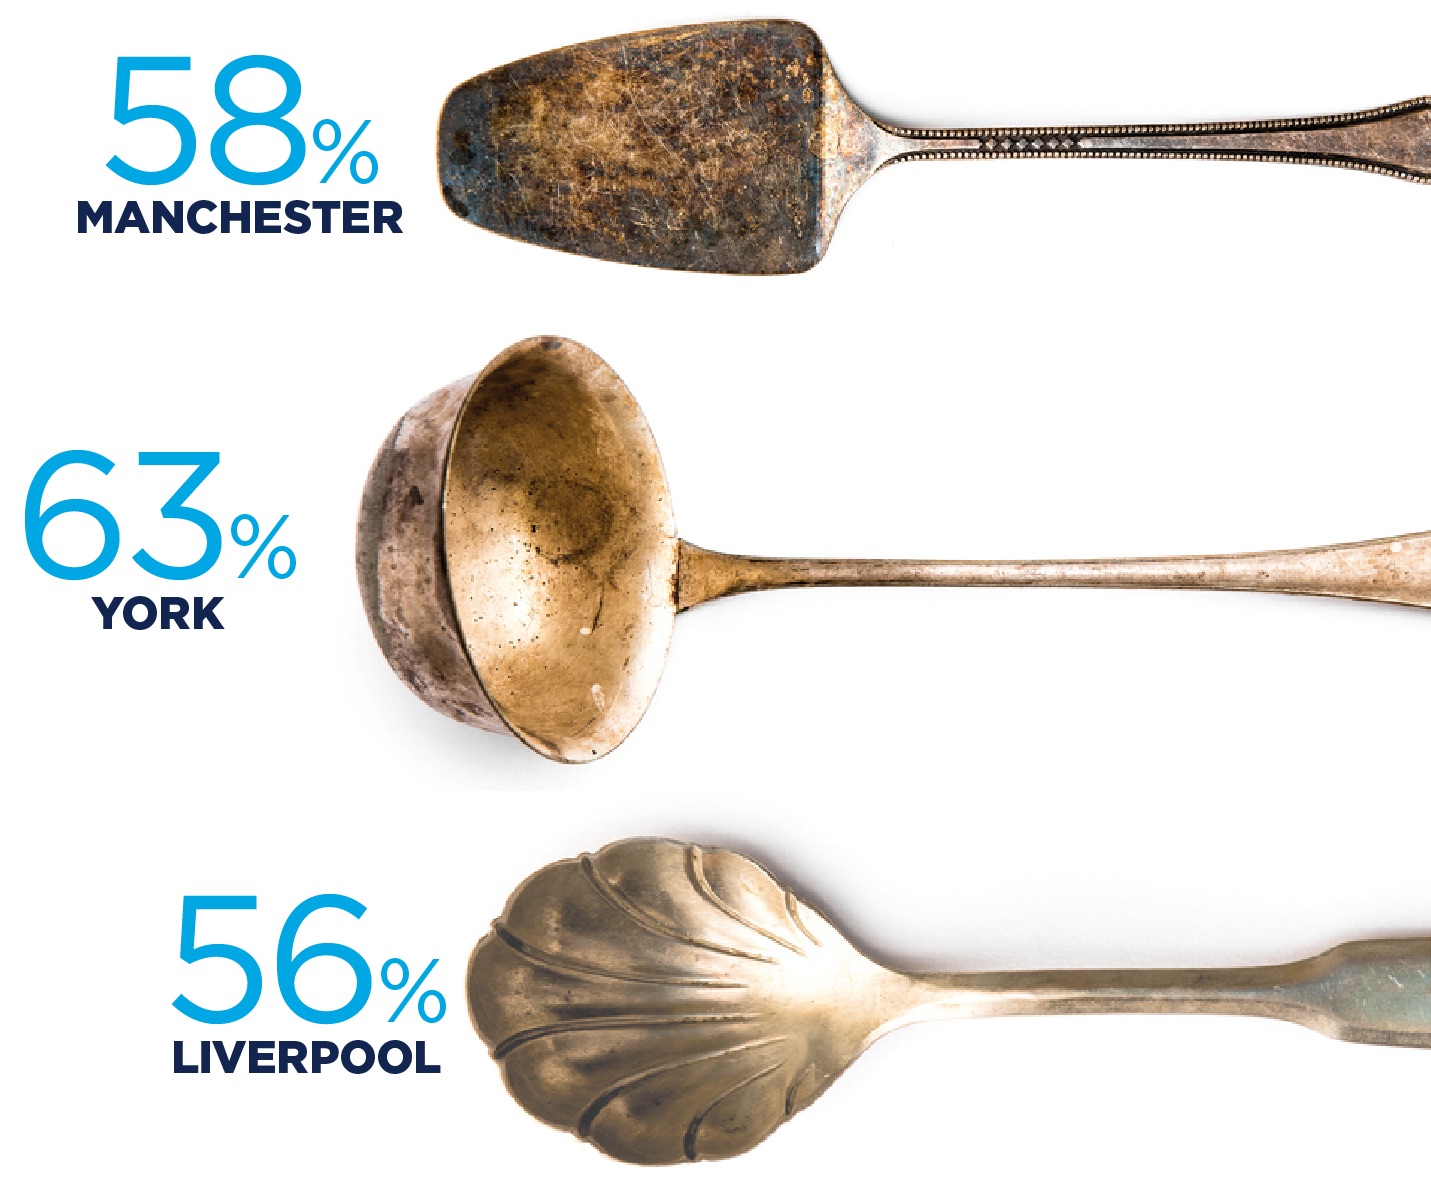 Picture of spoons with percentages